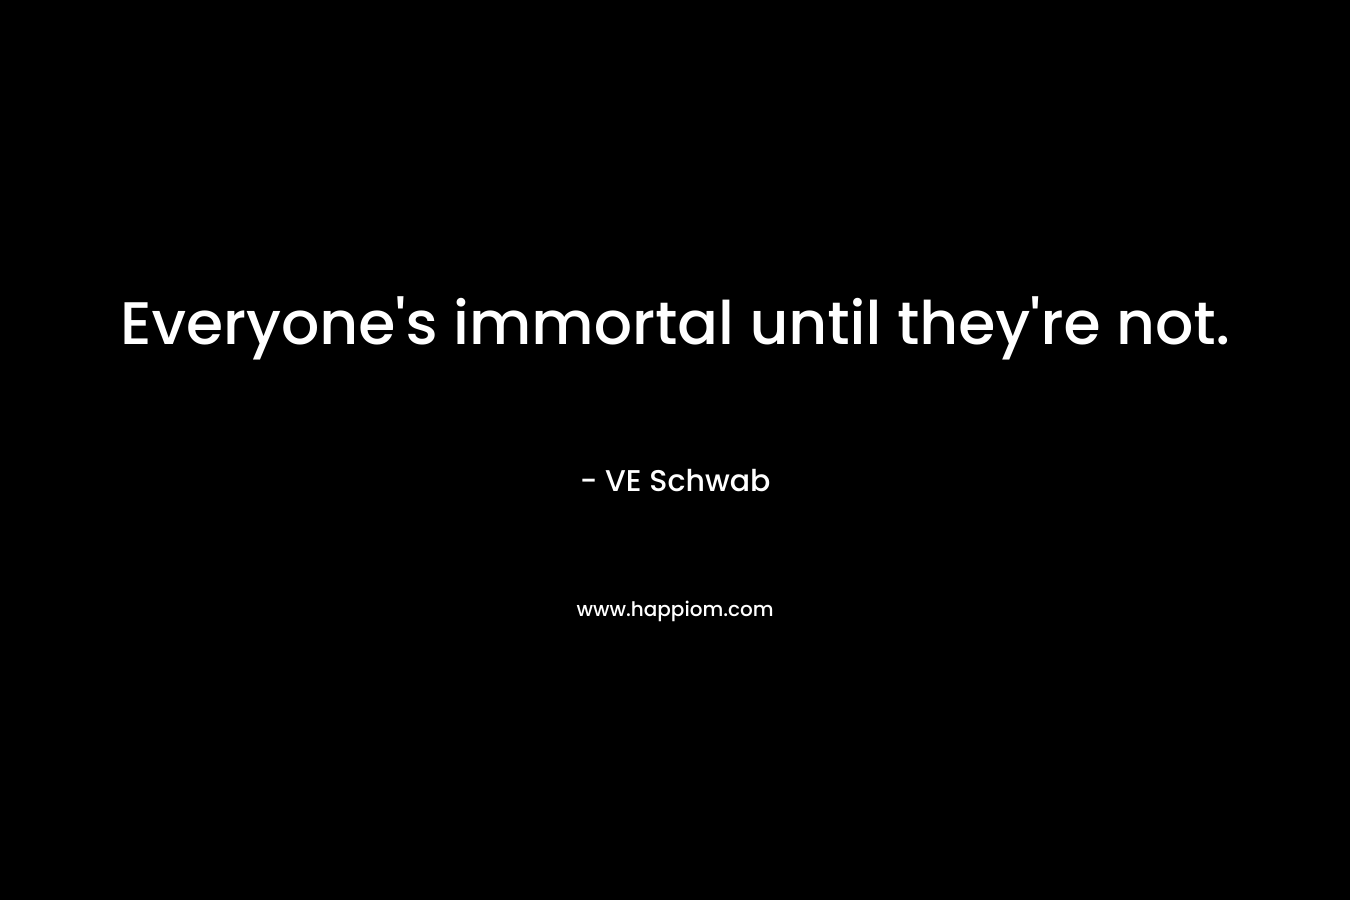 Everyone's immortal until they're not.